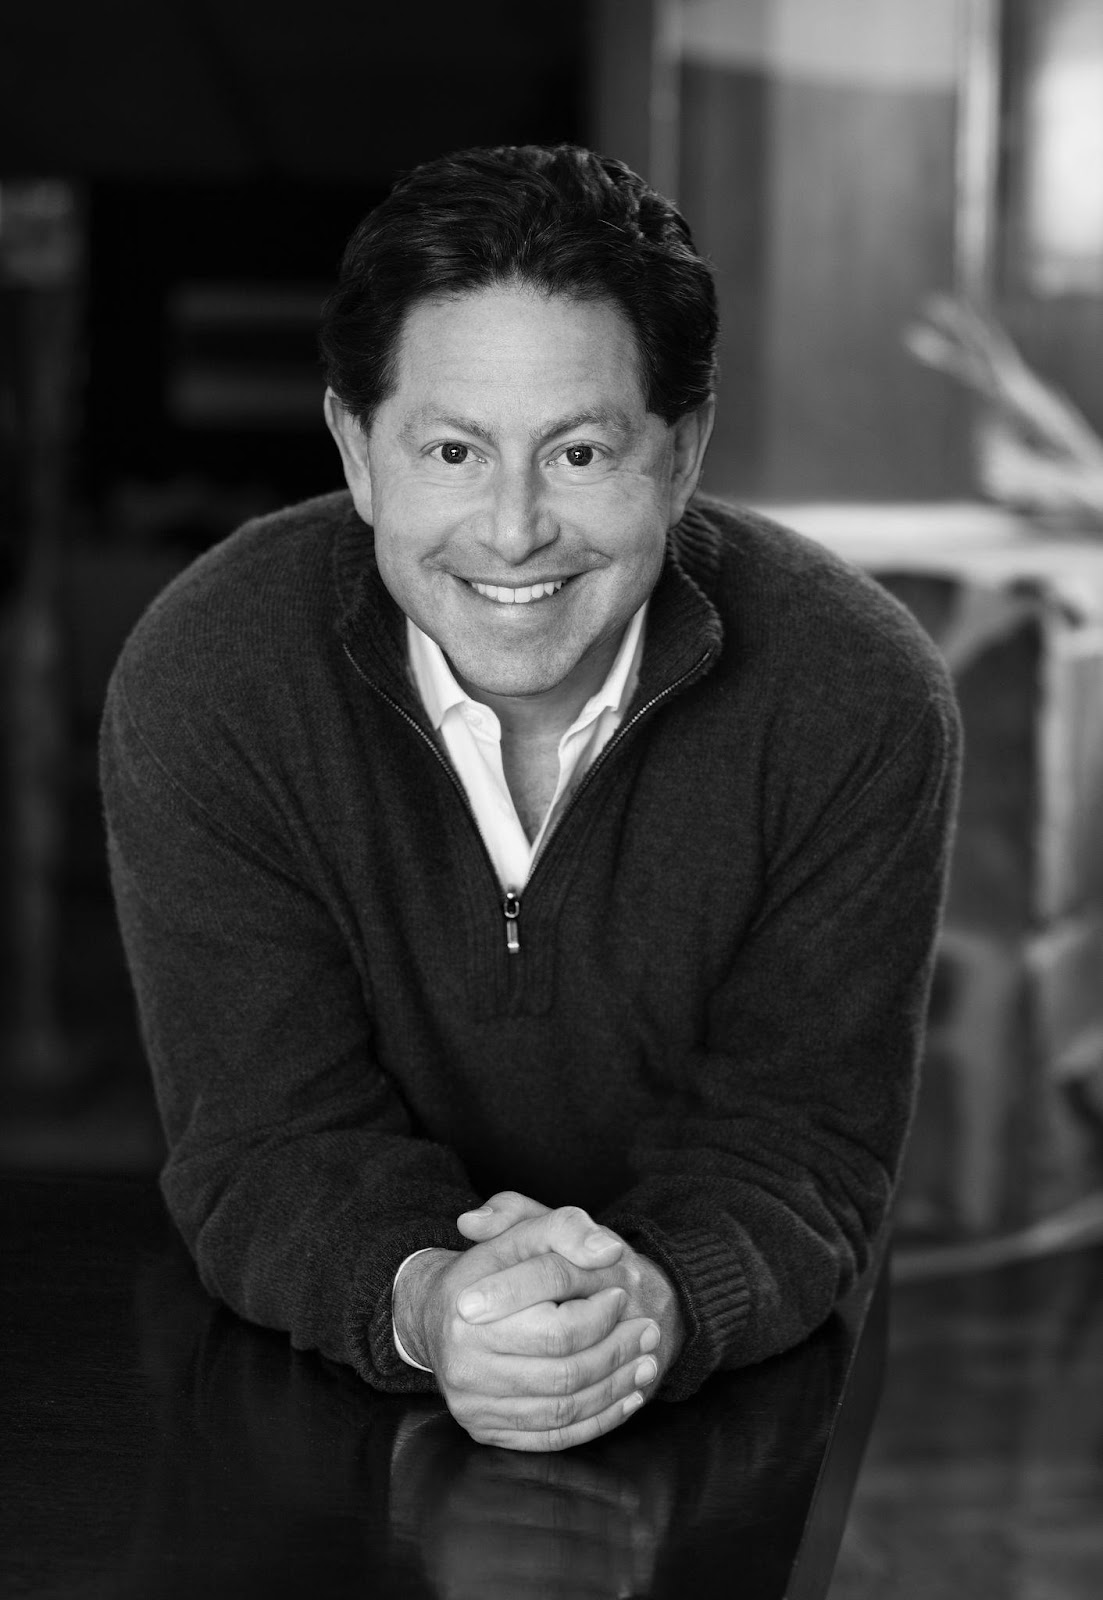 Bobby Kotick Update: Activision CEO Is Reelected to the Board - Native News Online